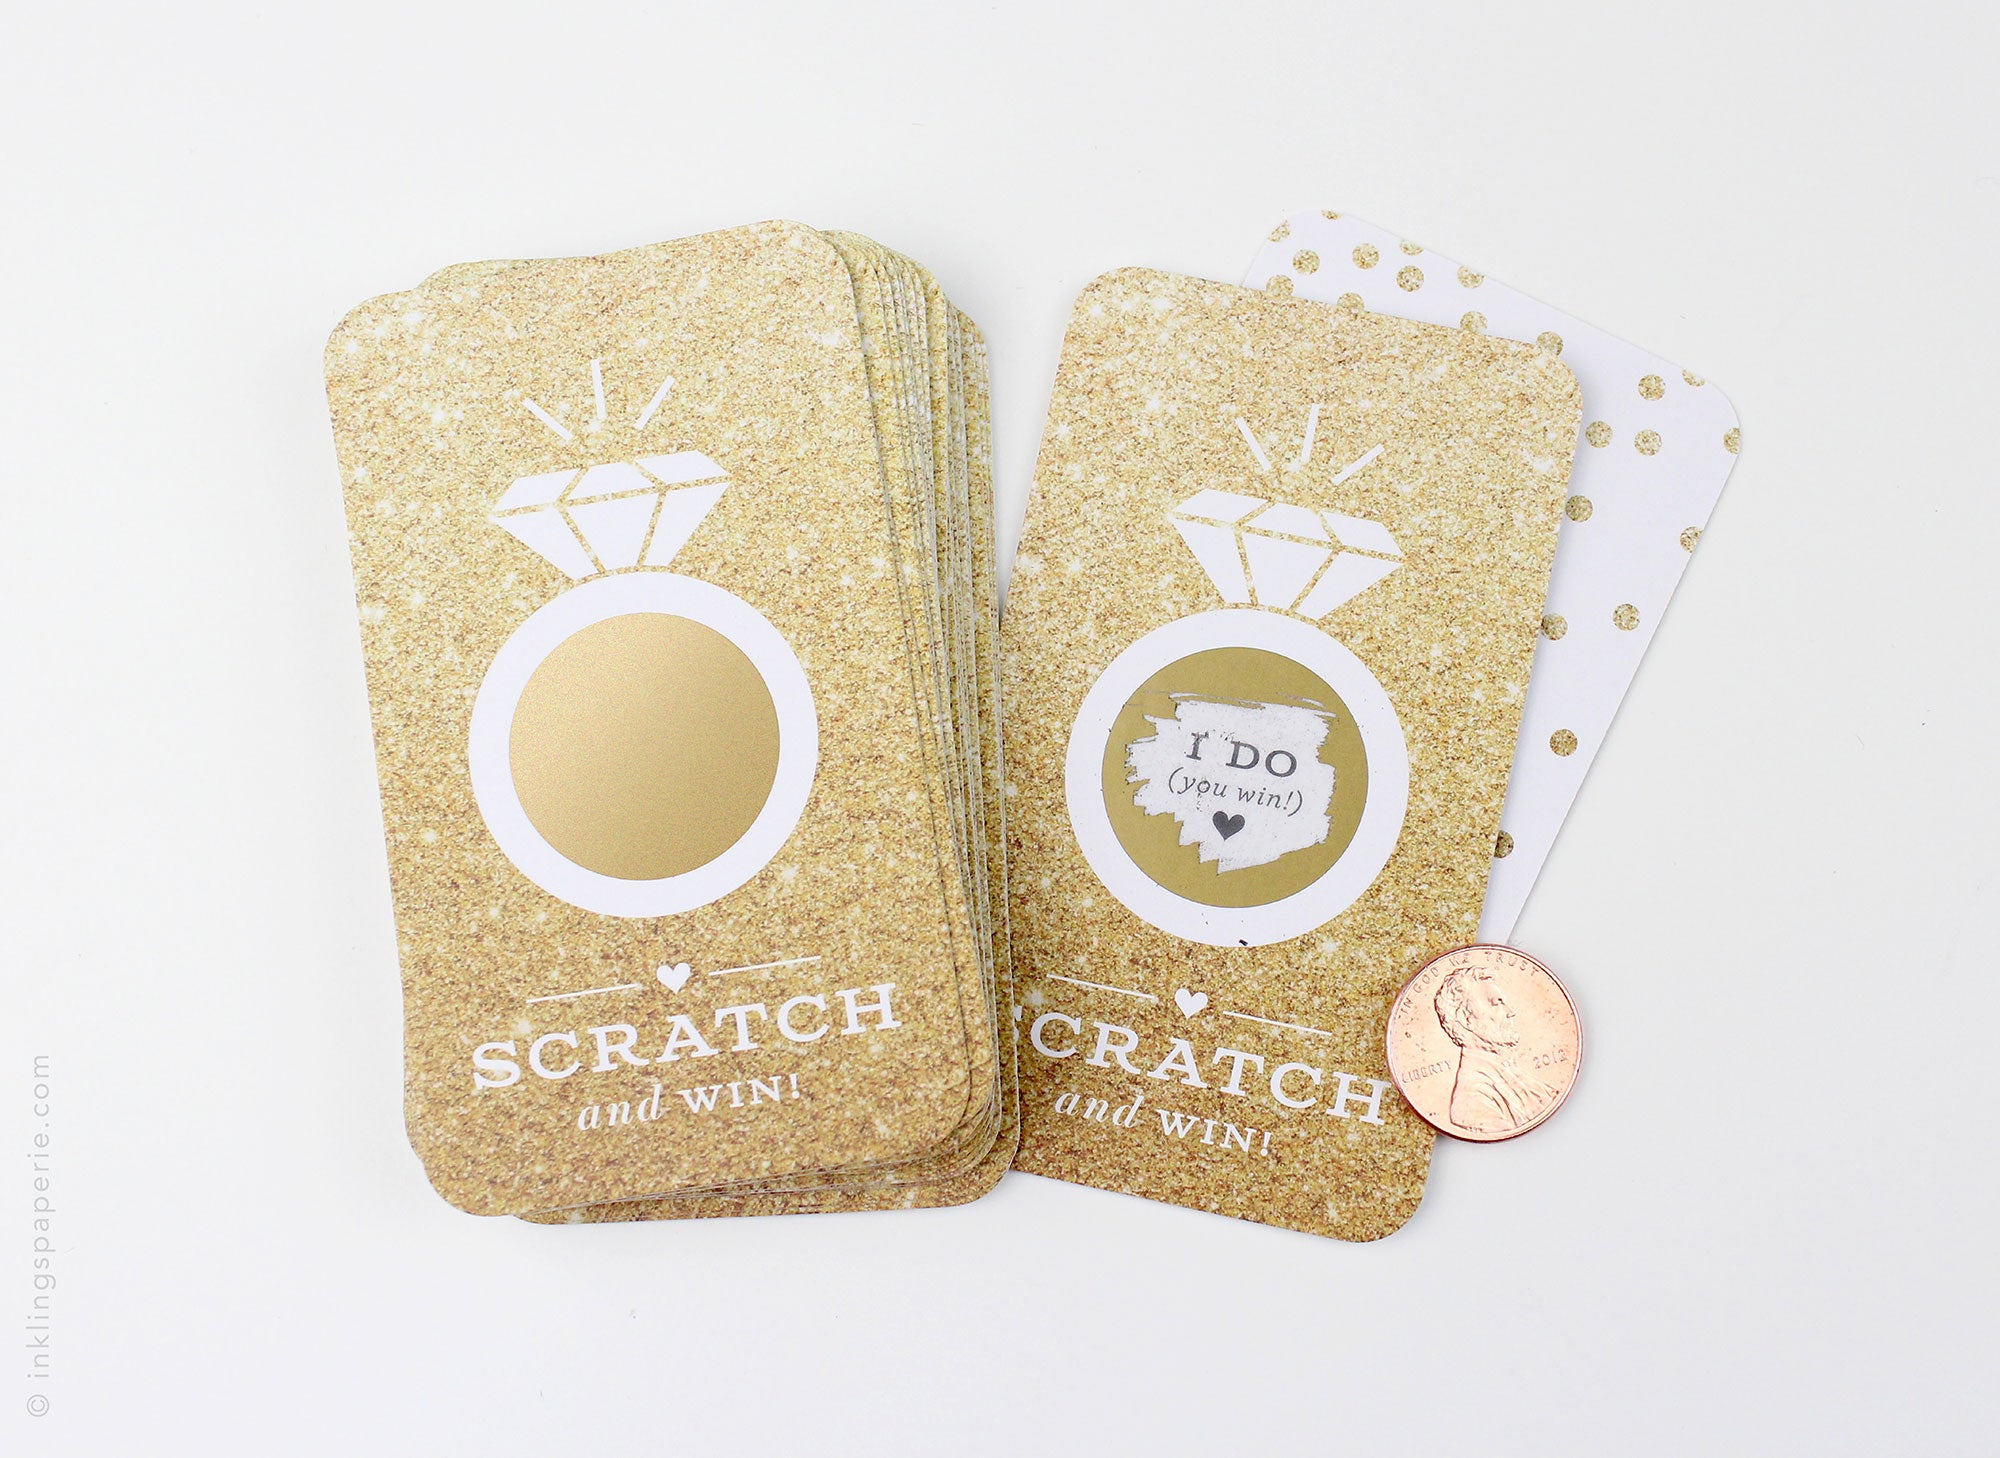 Bridal Scratch-off Game - Gold Glitter – Inklings Paperie